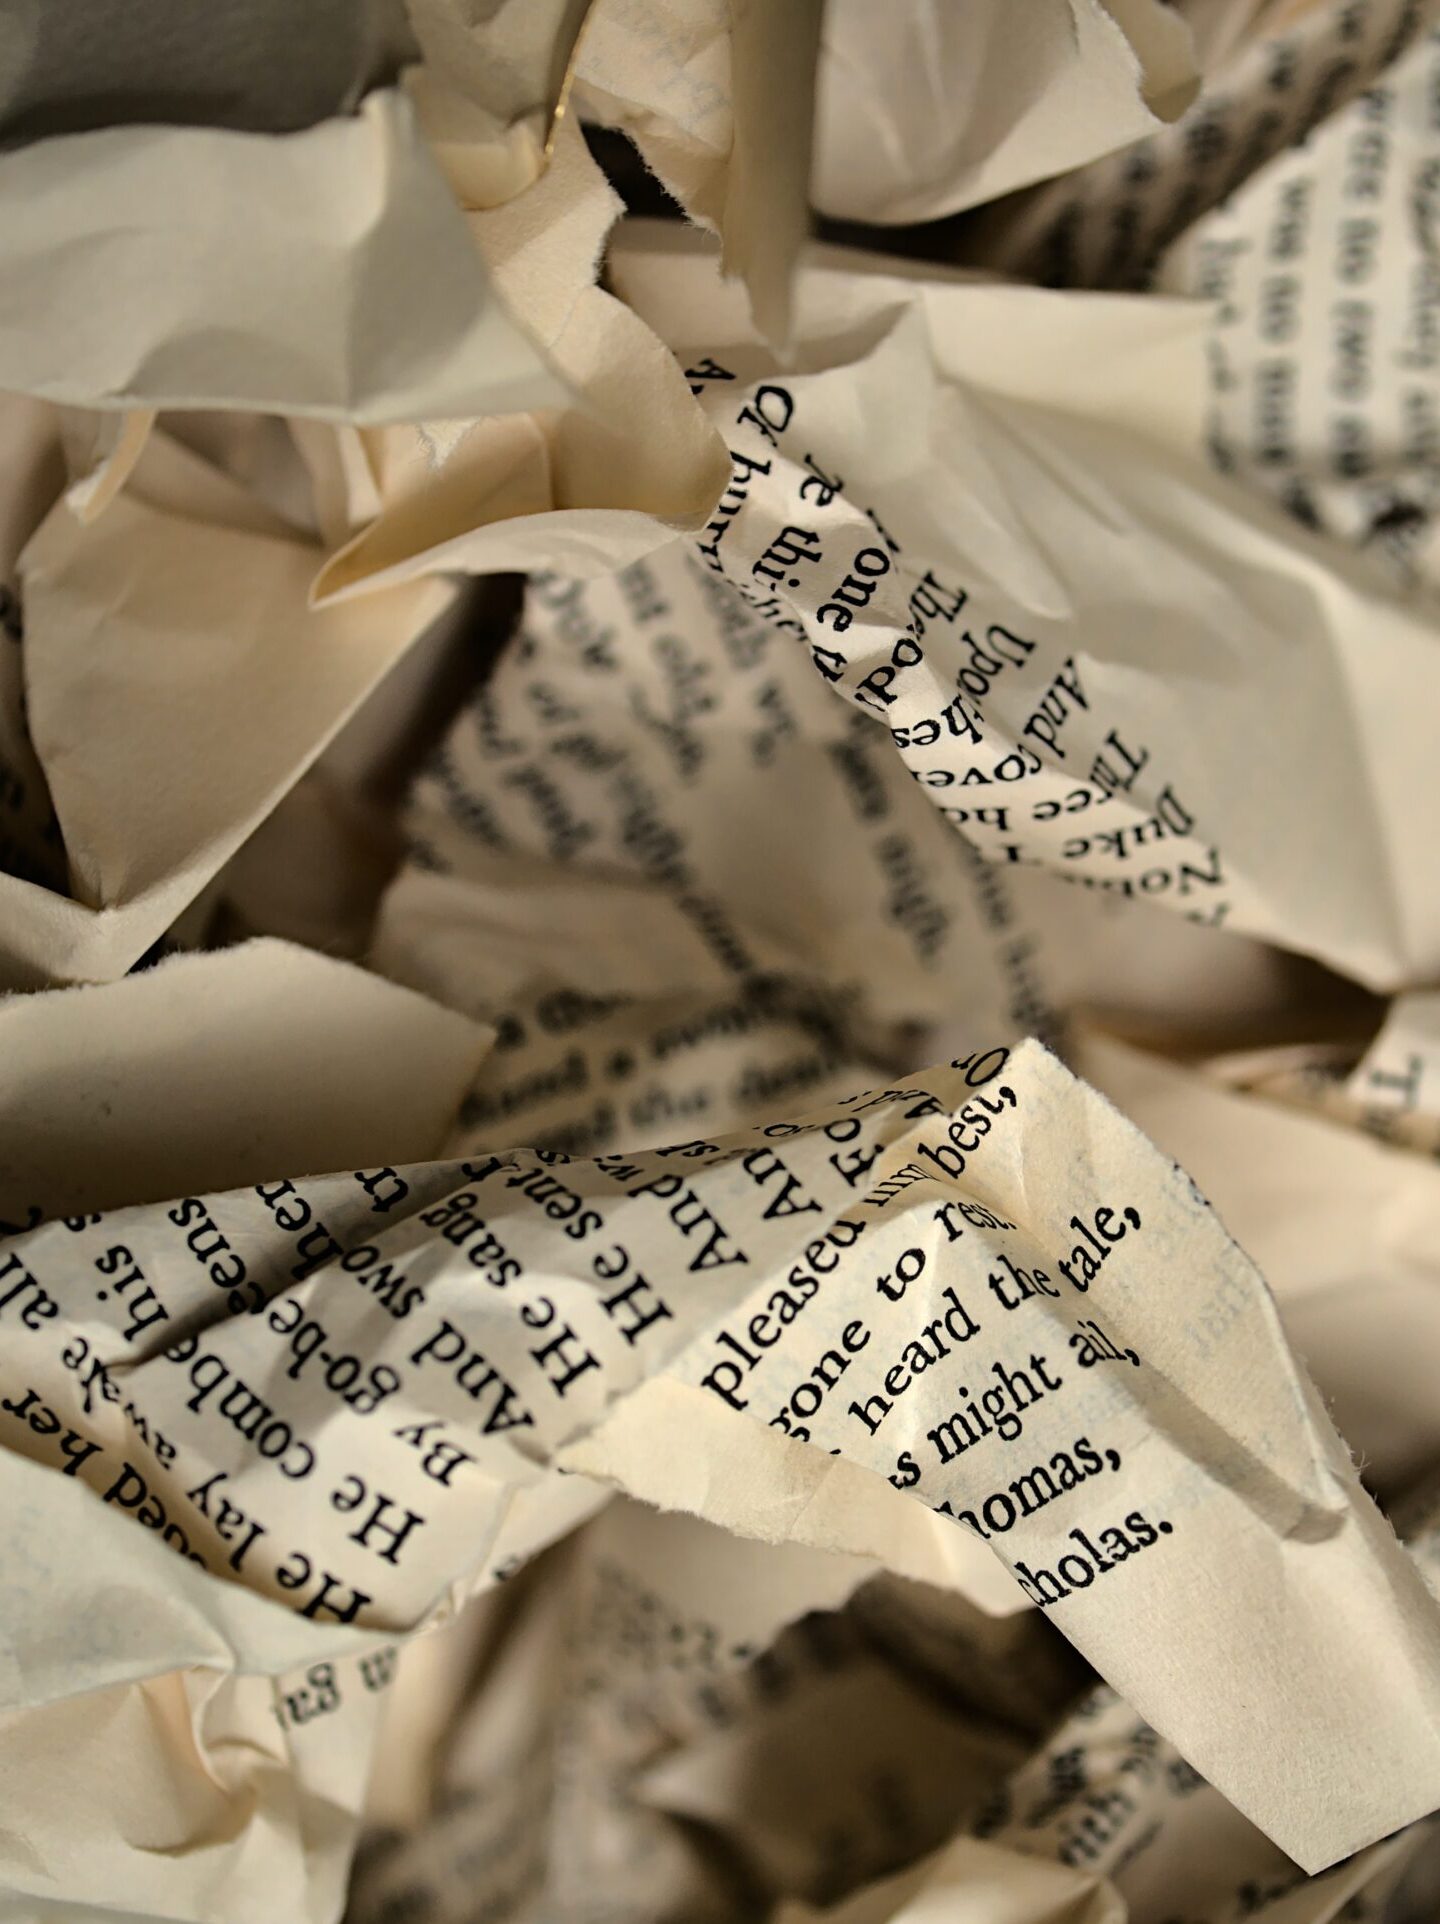 Crumpled Pages from a Book